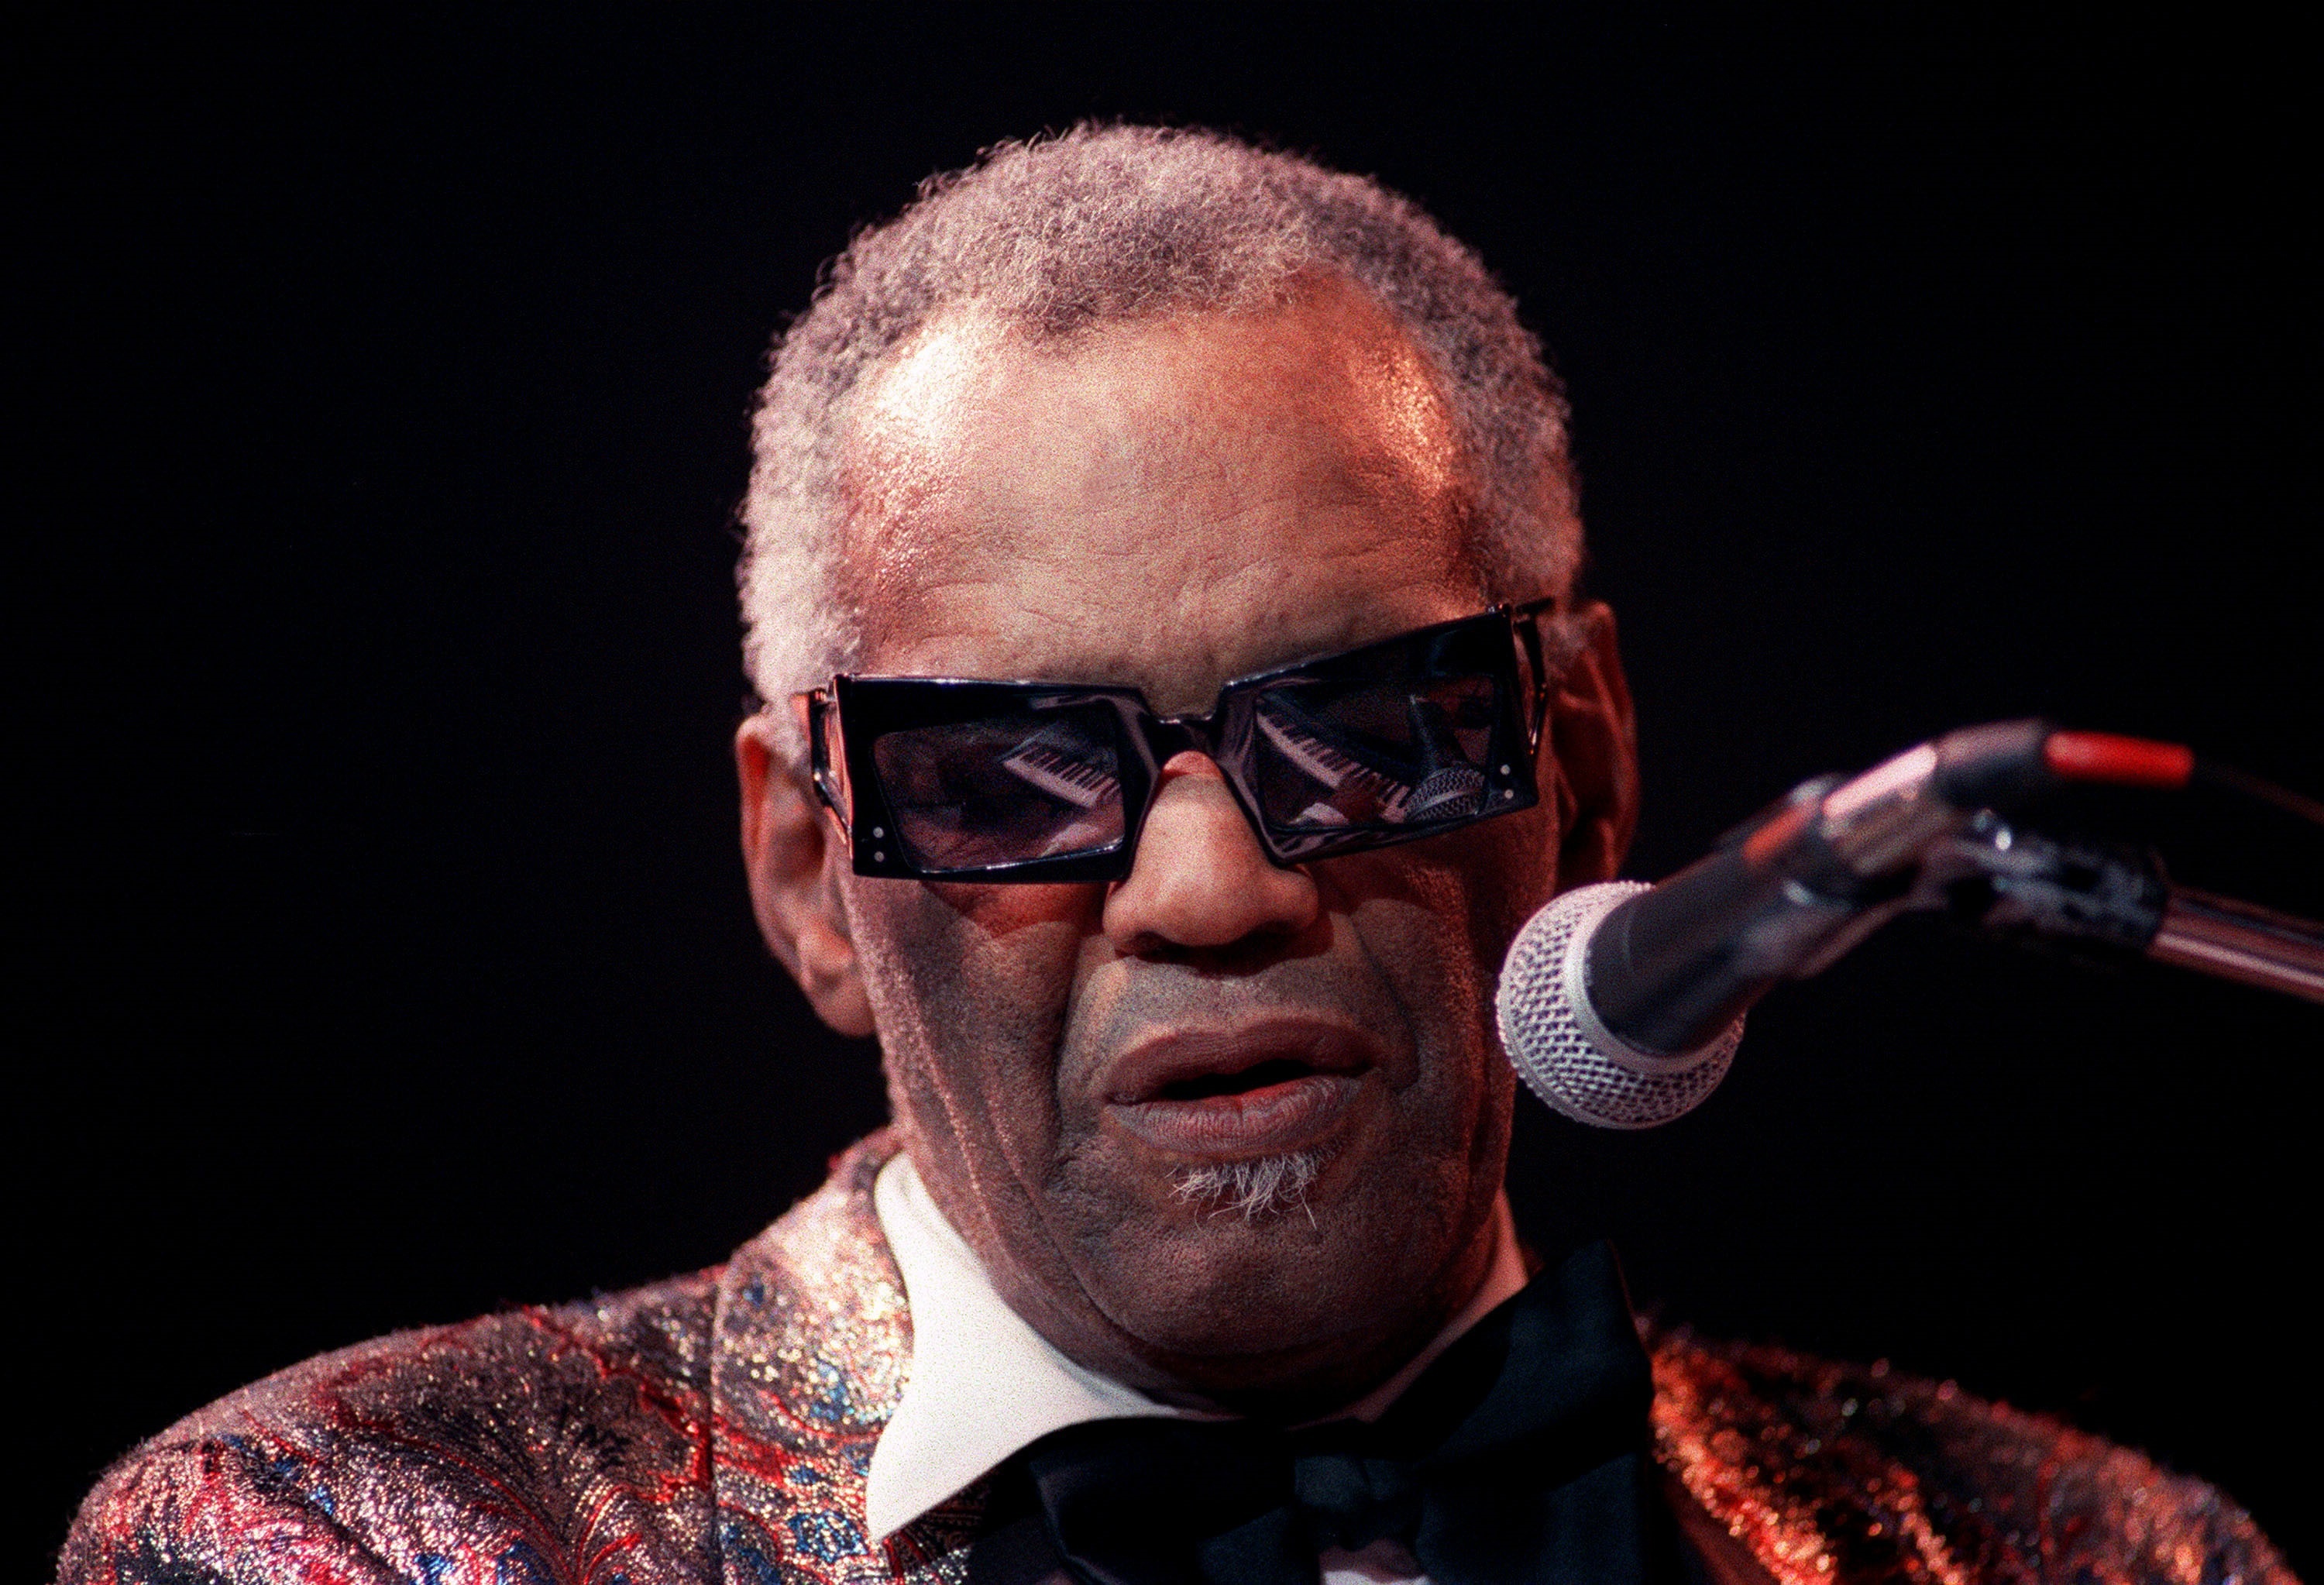 Ray Charles, Ethan Simpson's wallpapers, Musical legend, Iconic photos, 3000x2050 HD Desktop